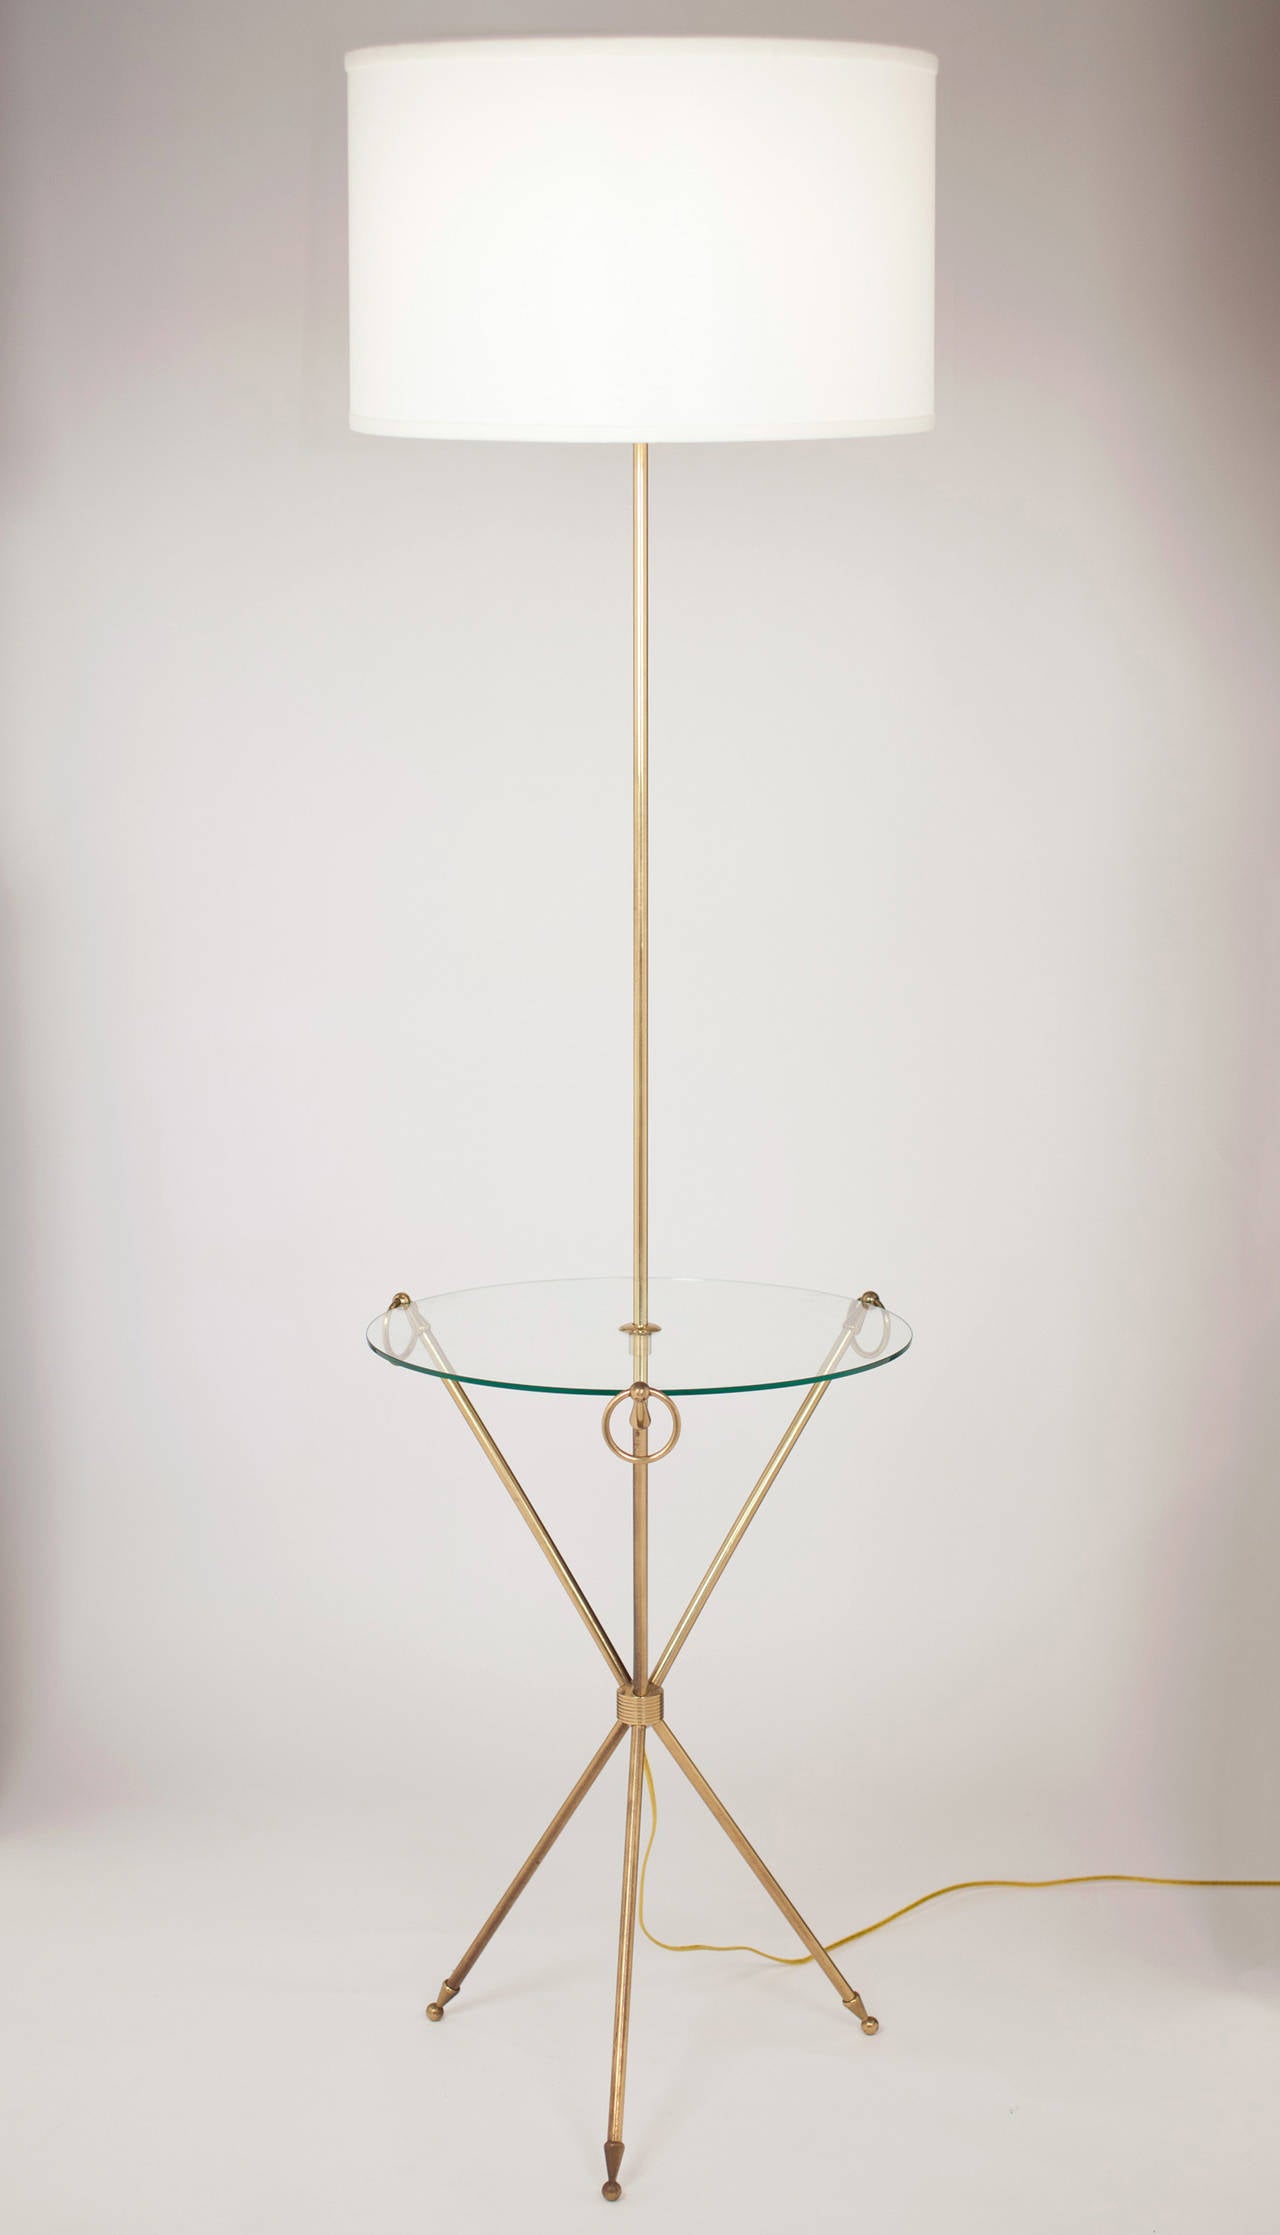 French vintage floor lamp and side table in brass and glass by Maison Jansen. The height of the table is 25.75 in.